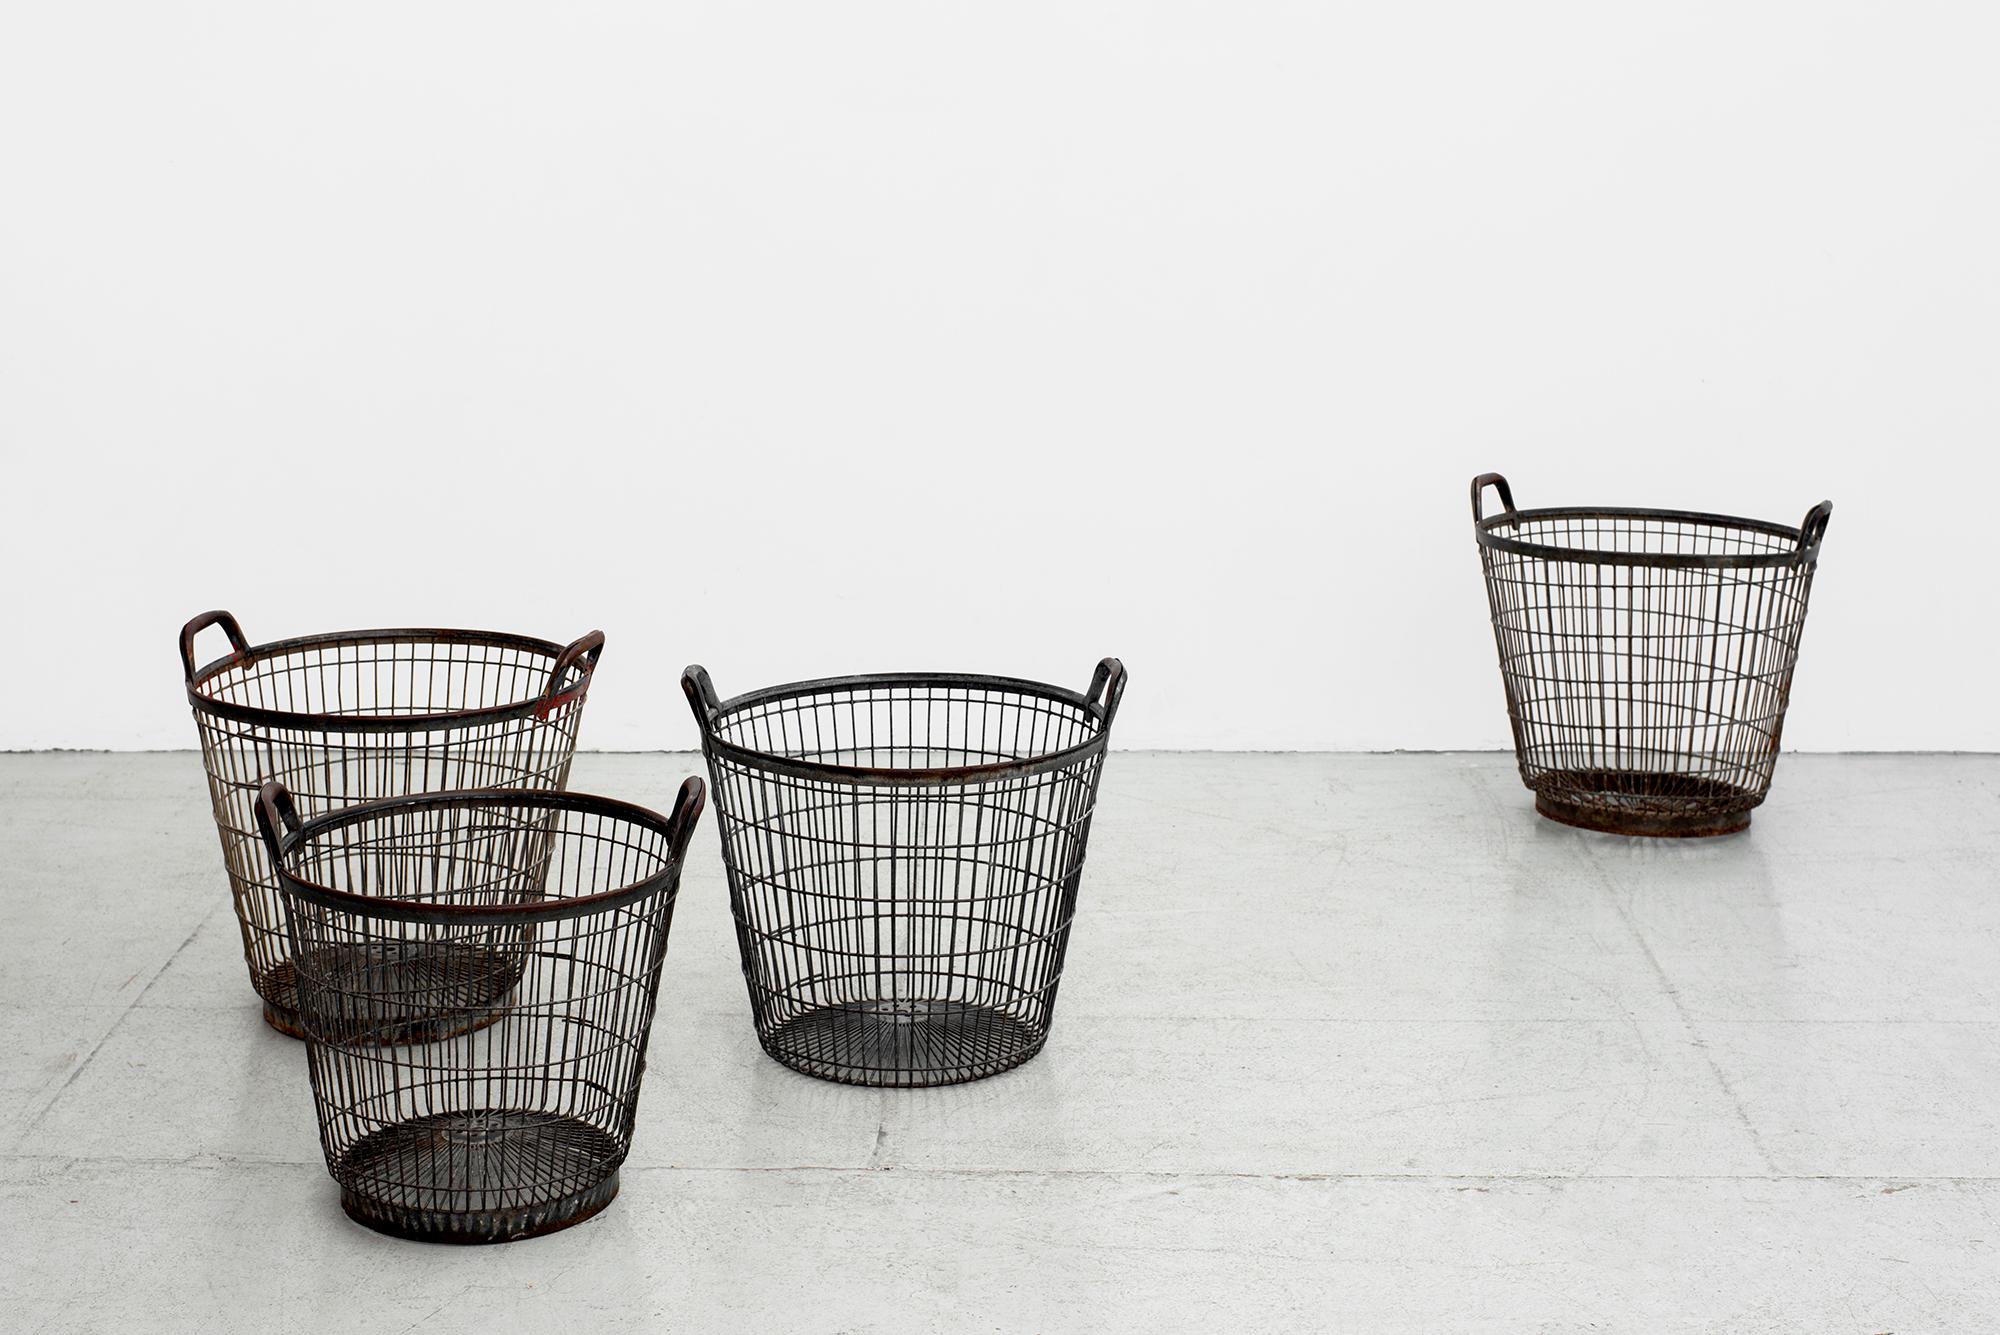 French cage style baskets in heavy black iron with beautiful patina. 
Sold and priced individually. 
Four available.

Measures: Basket #1
Diameter 17”
Height 17” 

Basket #2
Diameter17”
Height 16 1/4”

Basket #3
Diameter 17 1/2”
Height